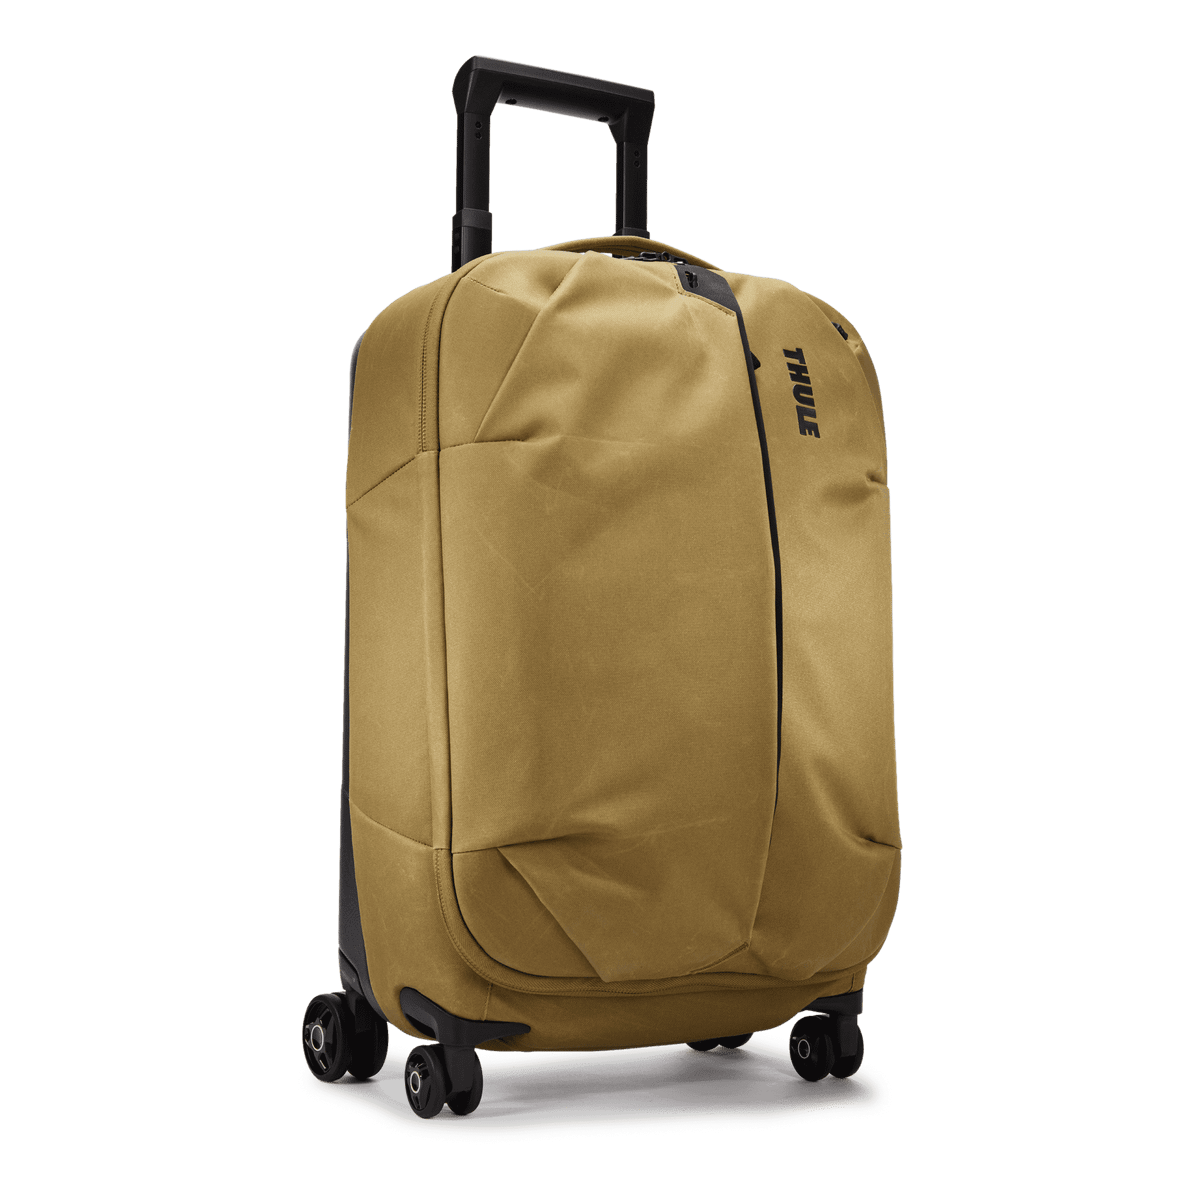 Thule Aion carry on spinner Nutria brown